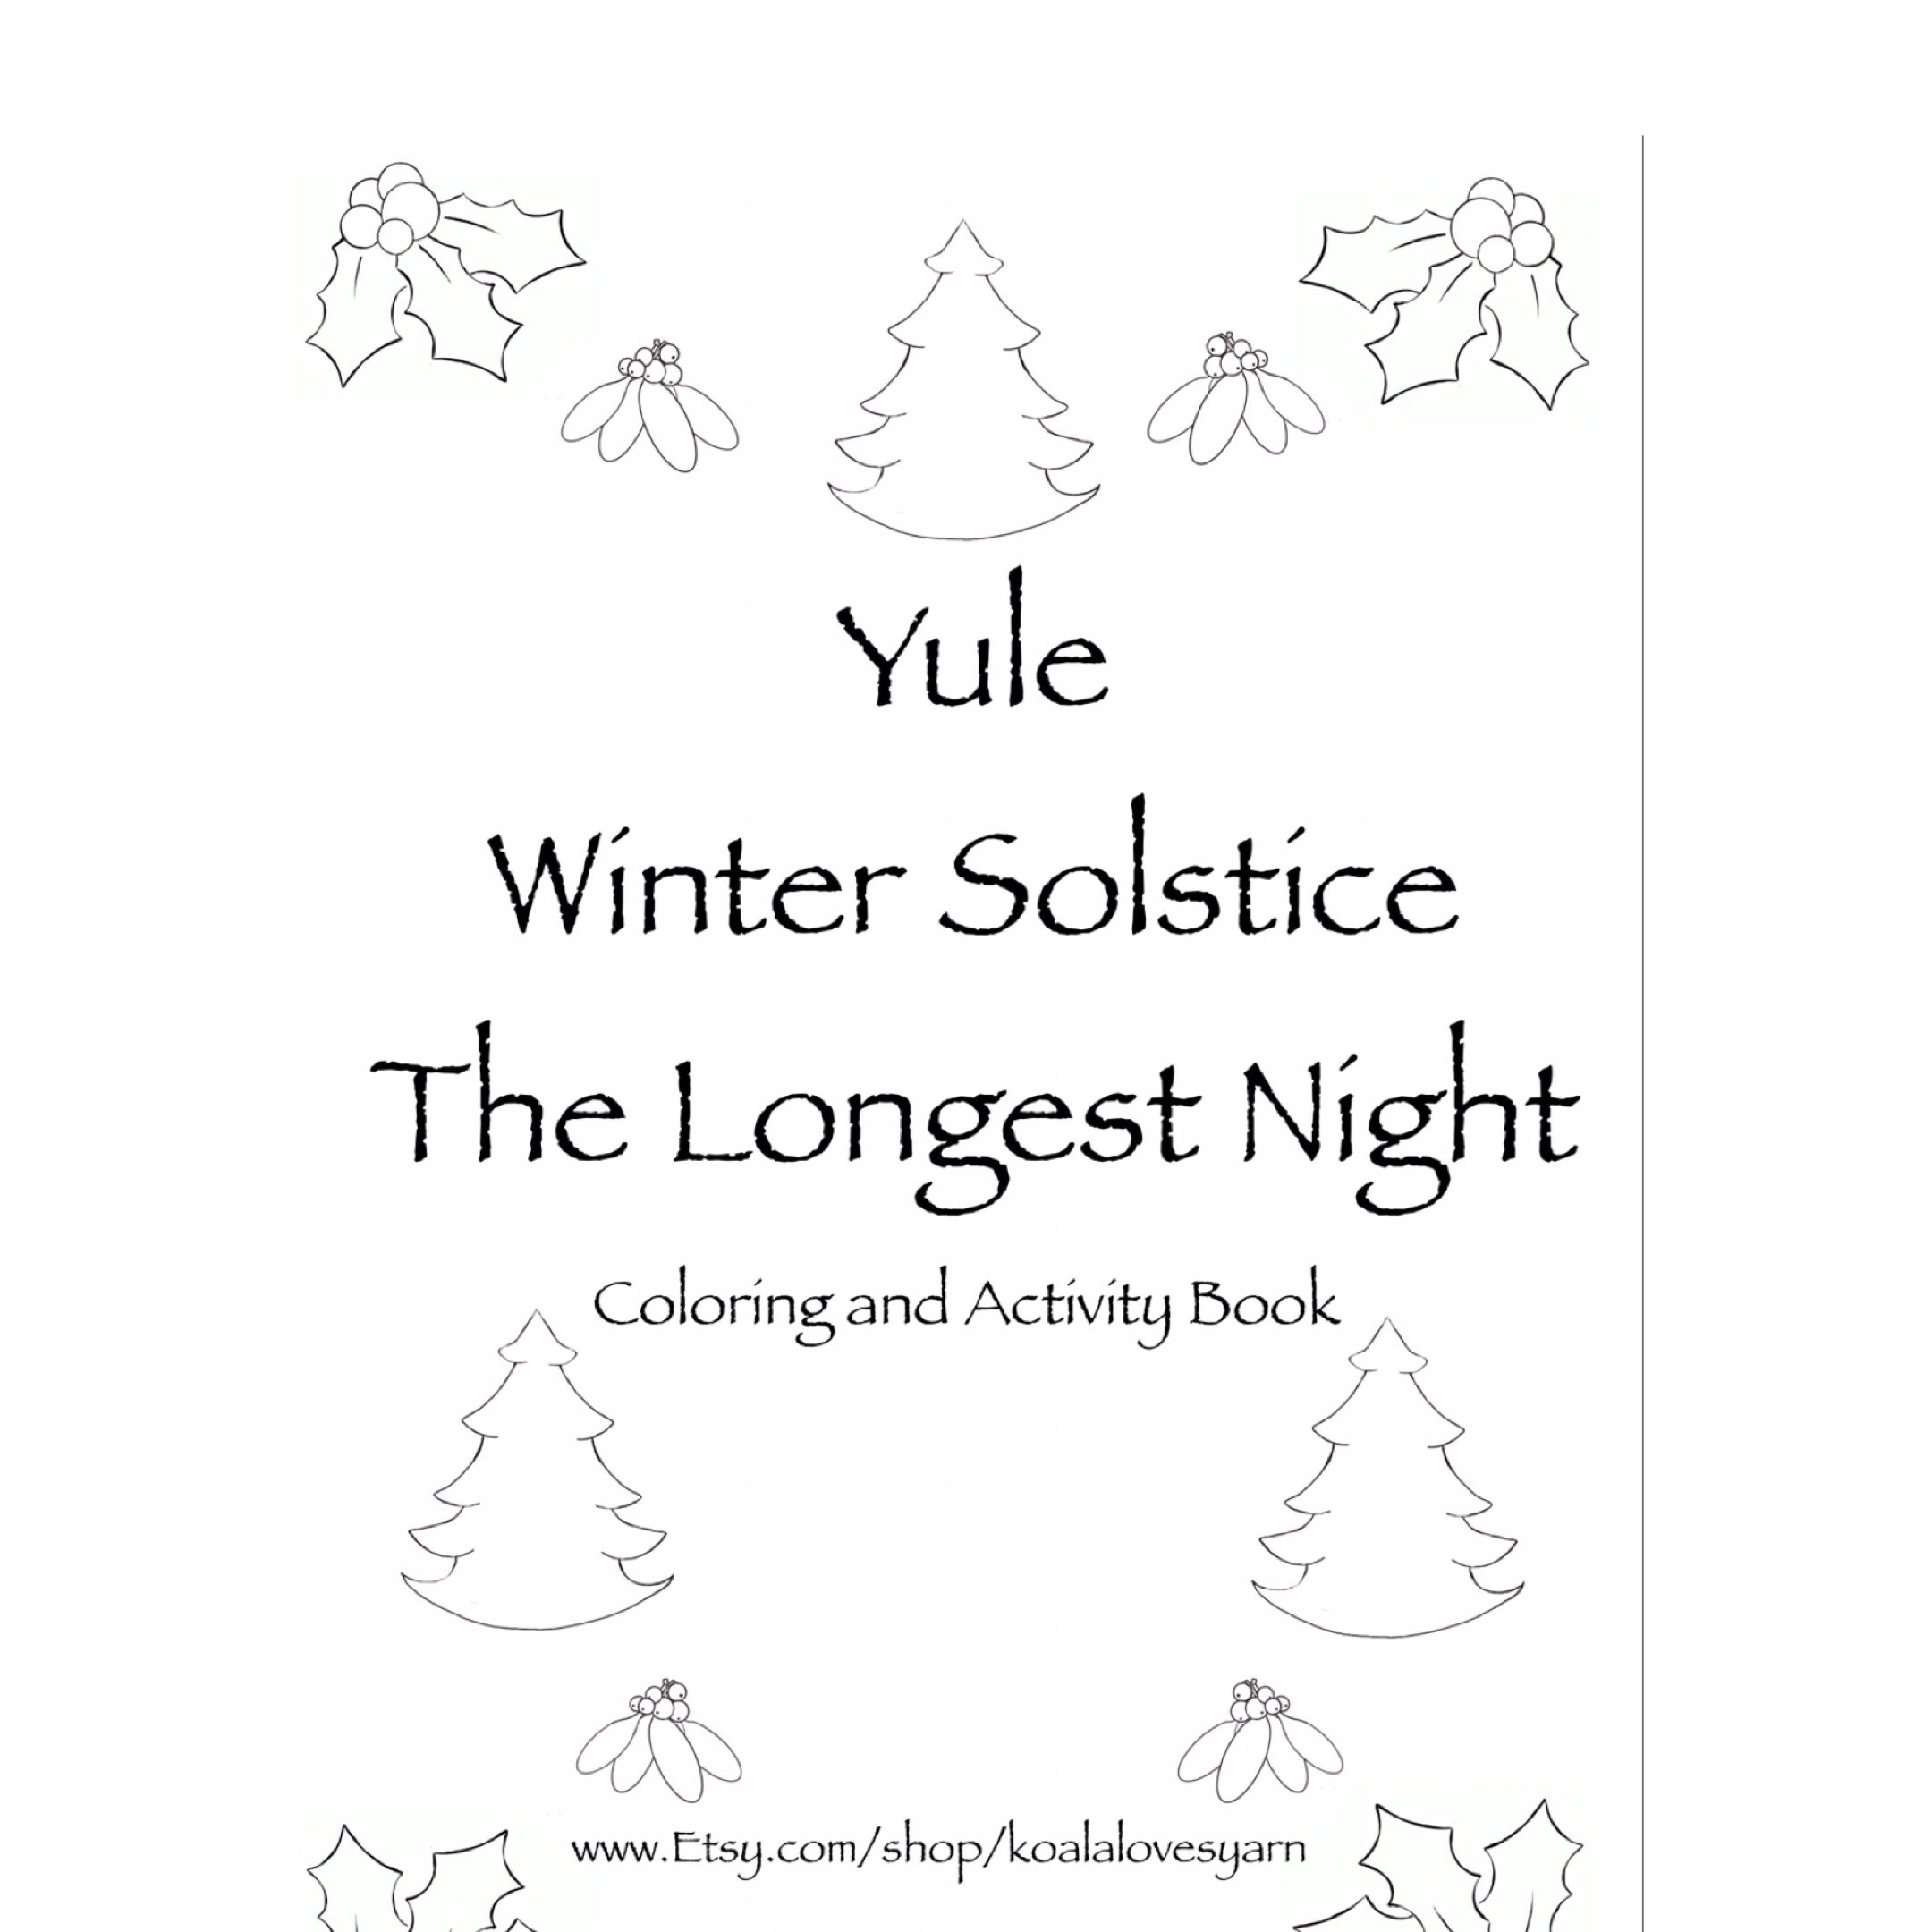 Coloring pages of yule winter solstice coloring and activity book of shadows christmas